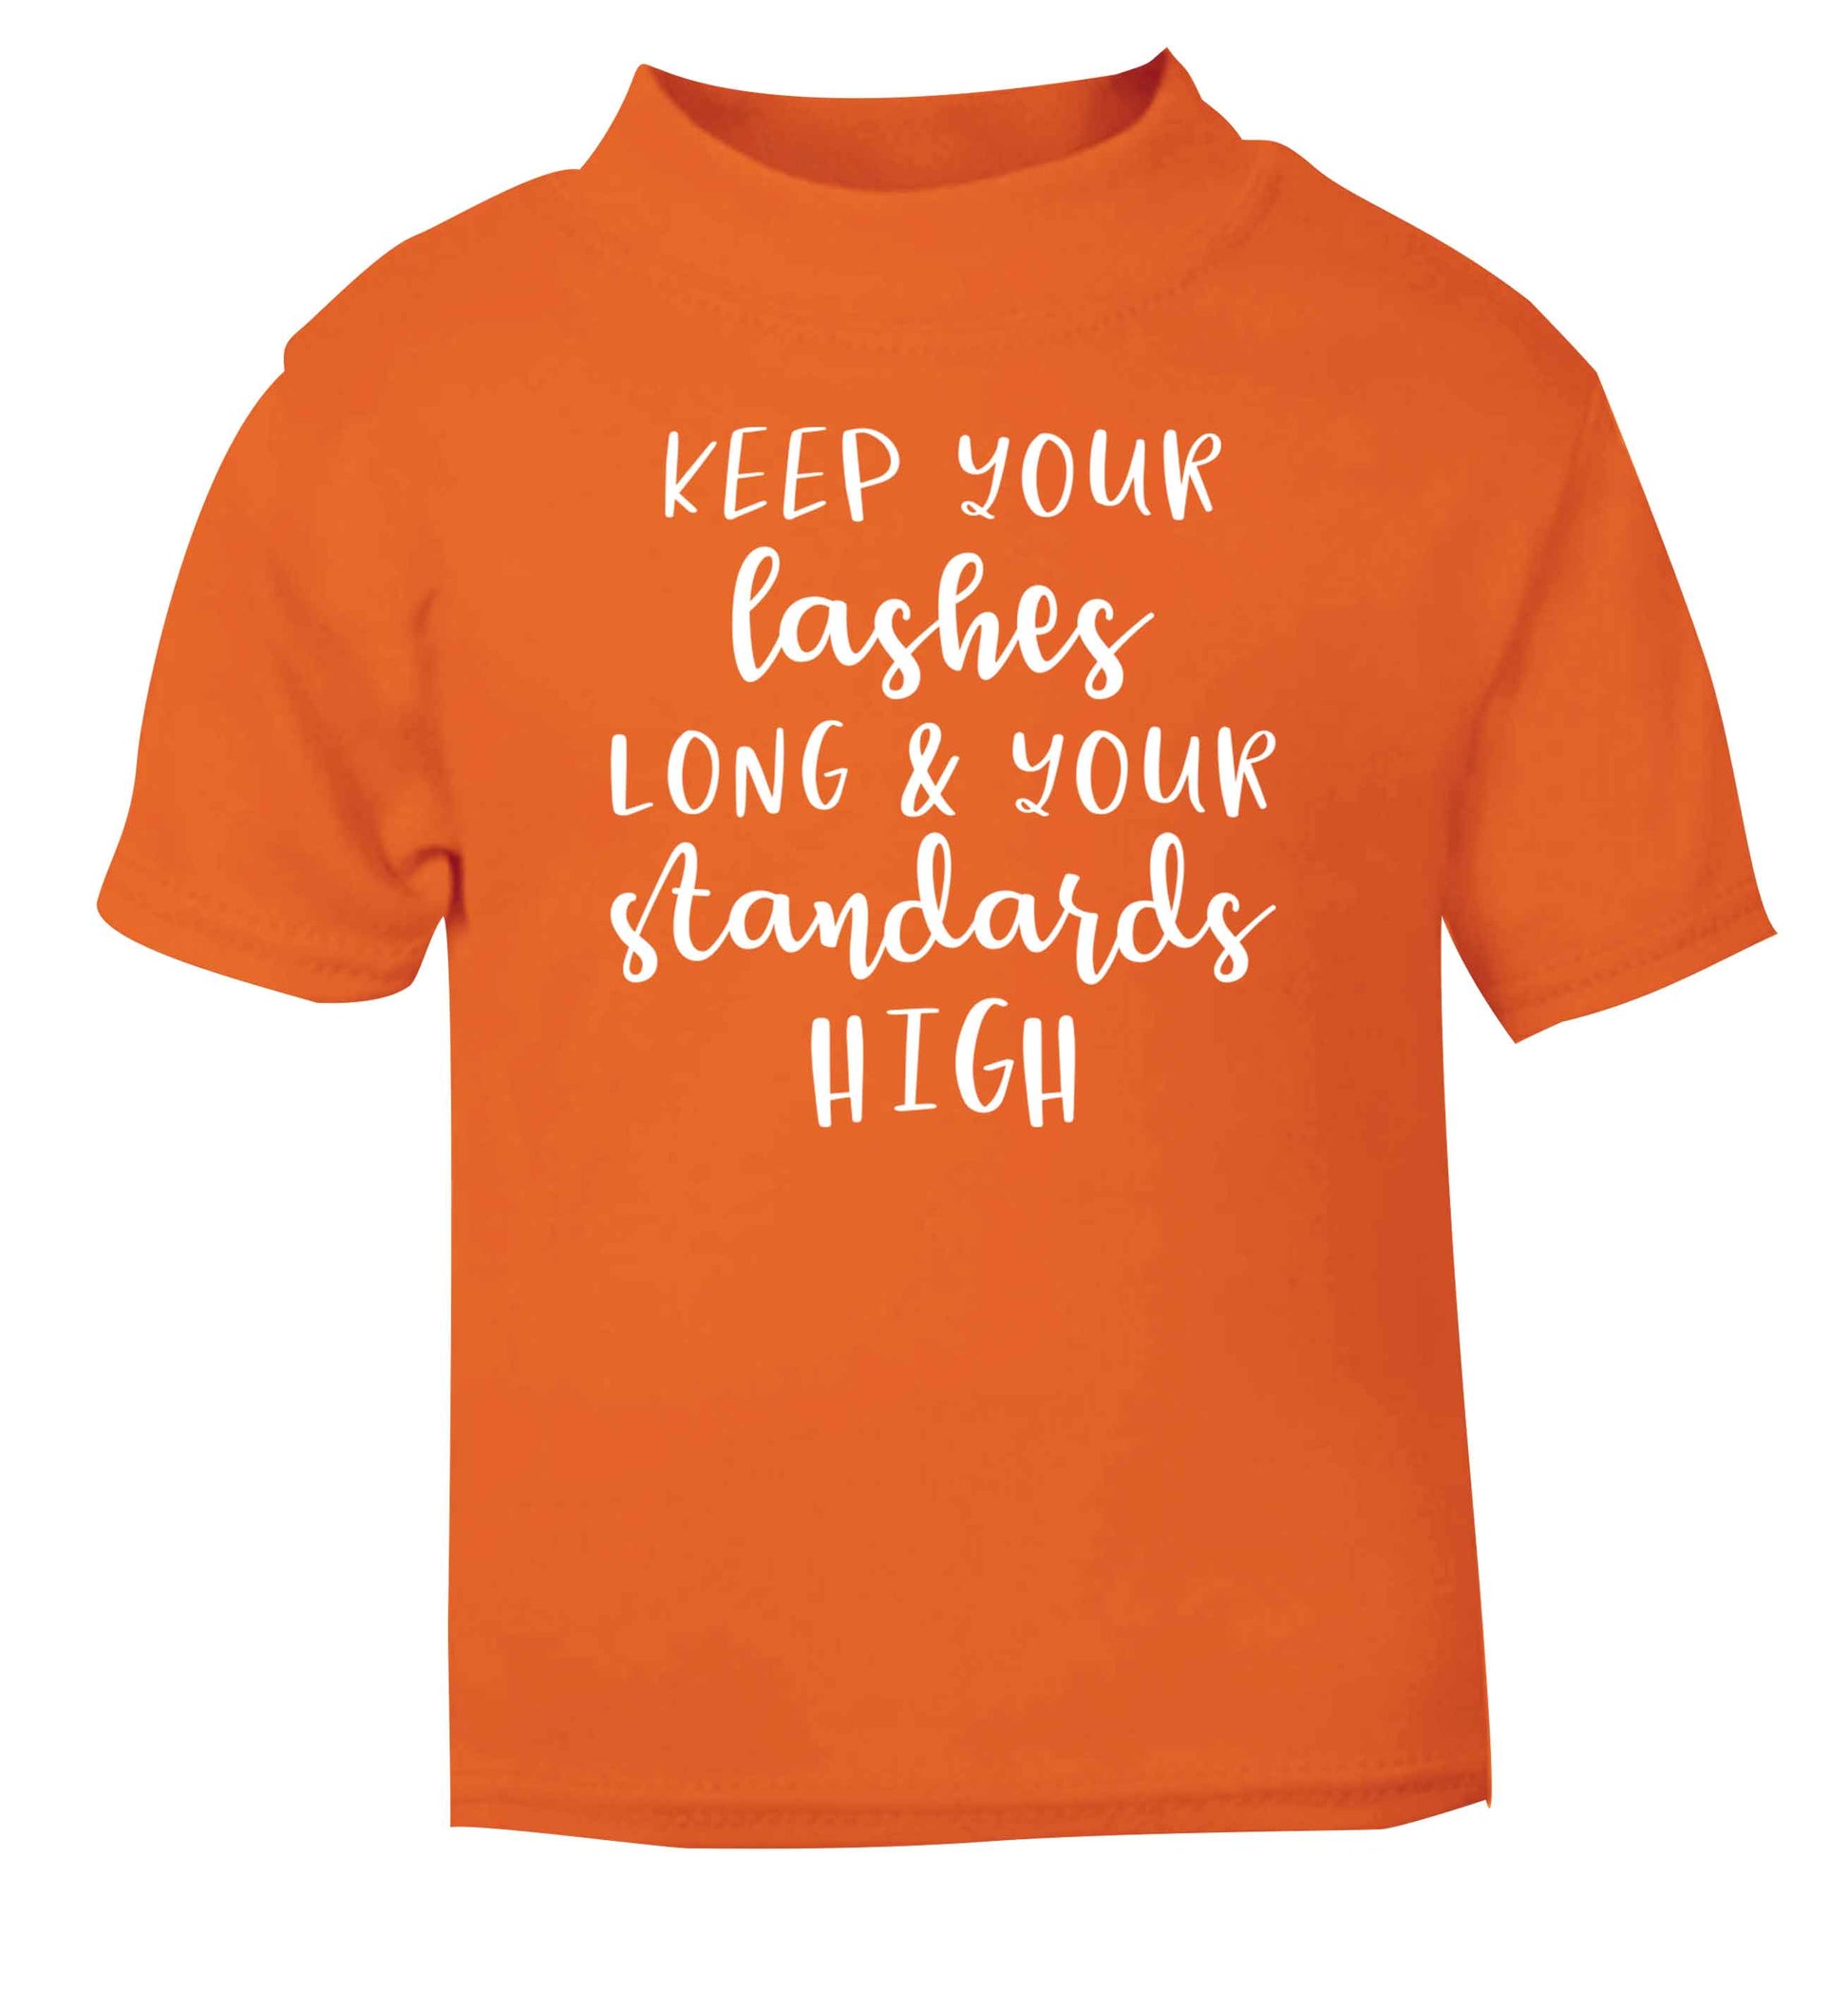 Keep your lashes long and your standards high orange Baby Toddler Tshirt 2 Years